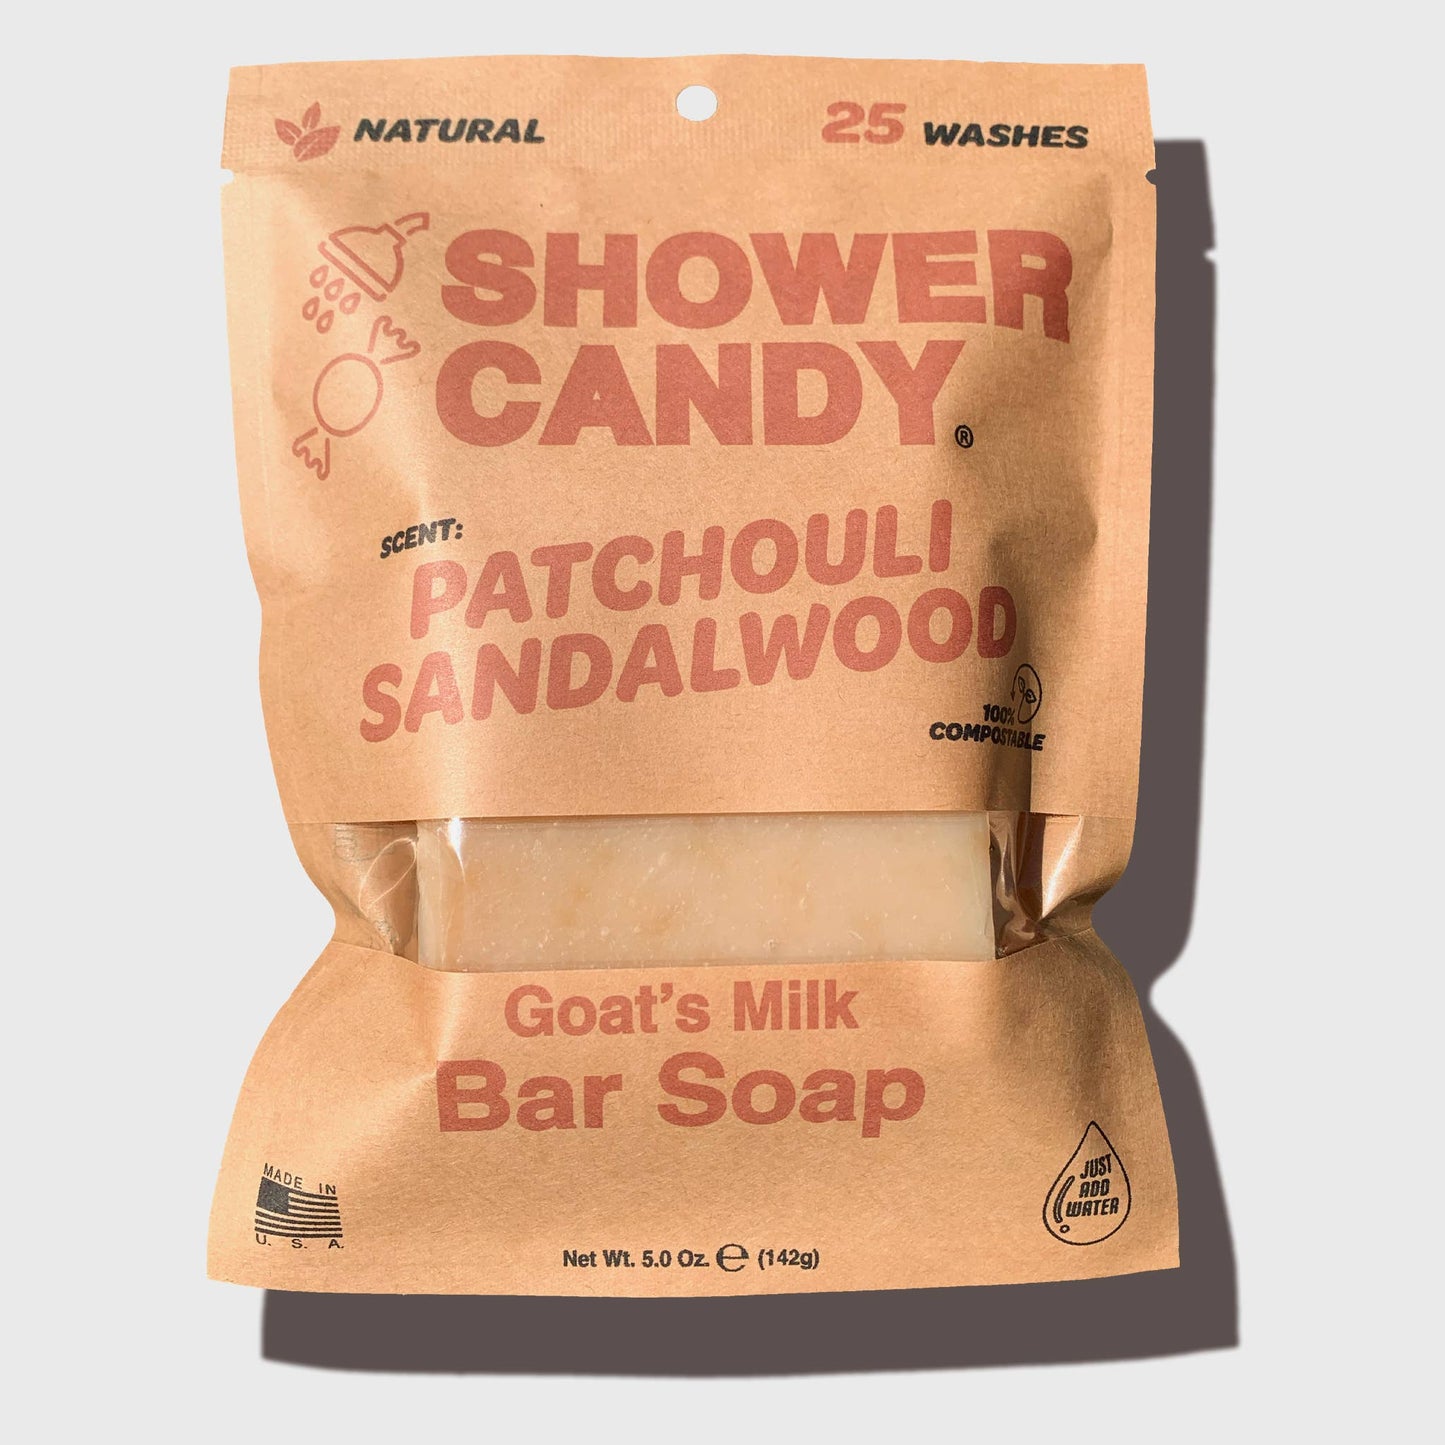 Shower Candy - Patchouli Sandalwood Body Wash Bar Soap with Goat's Milk